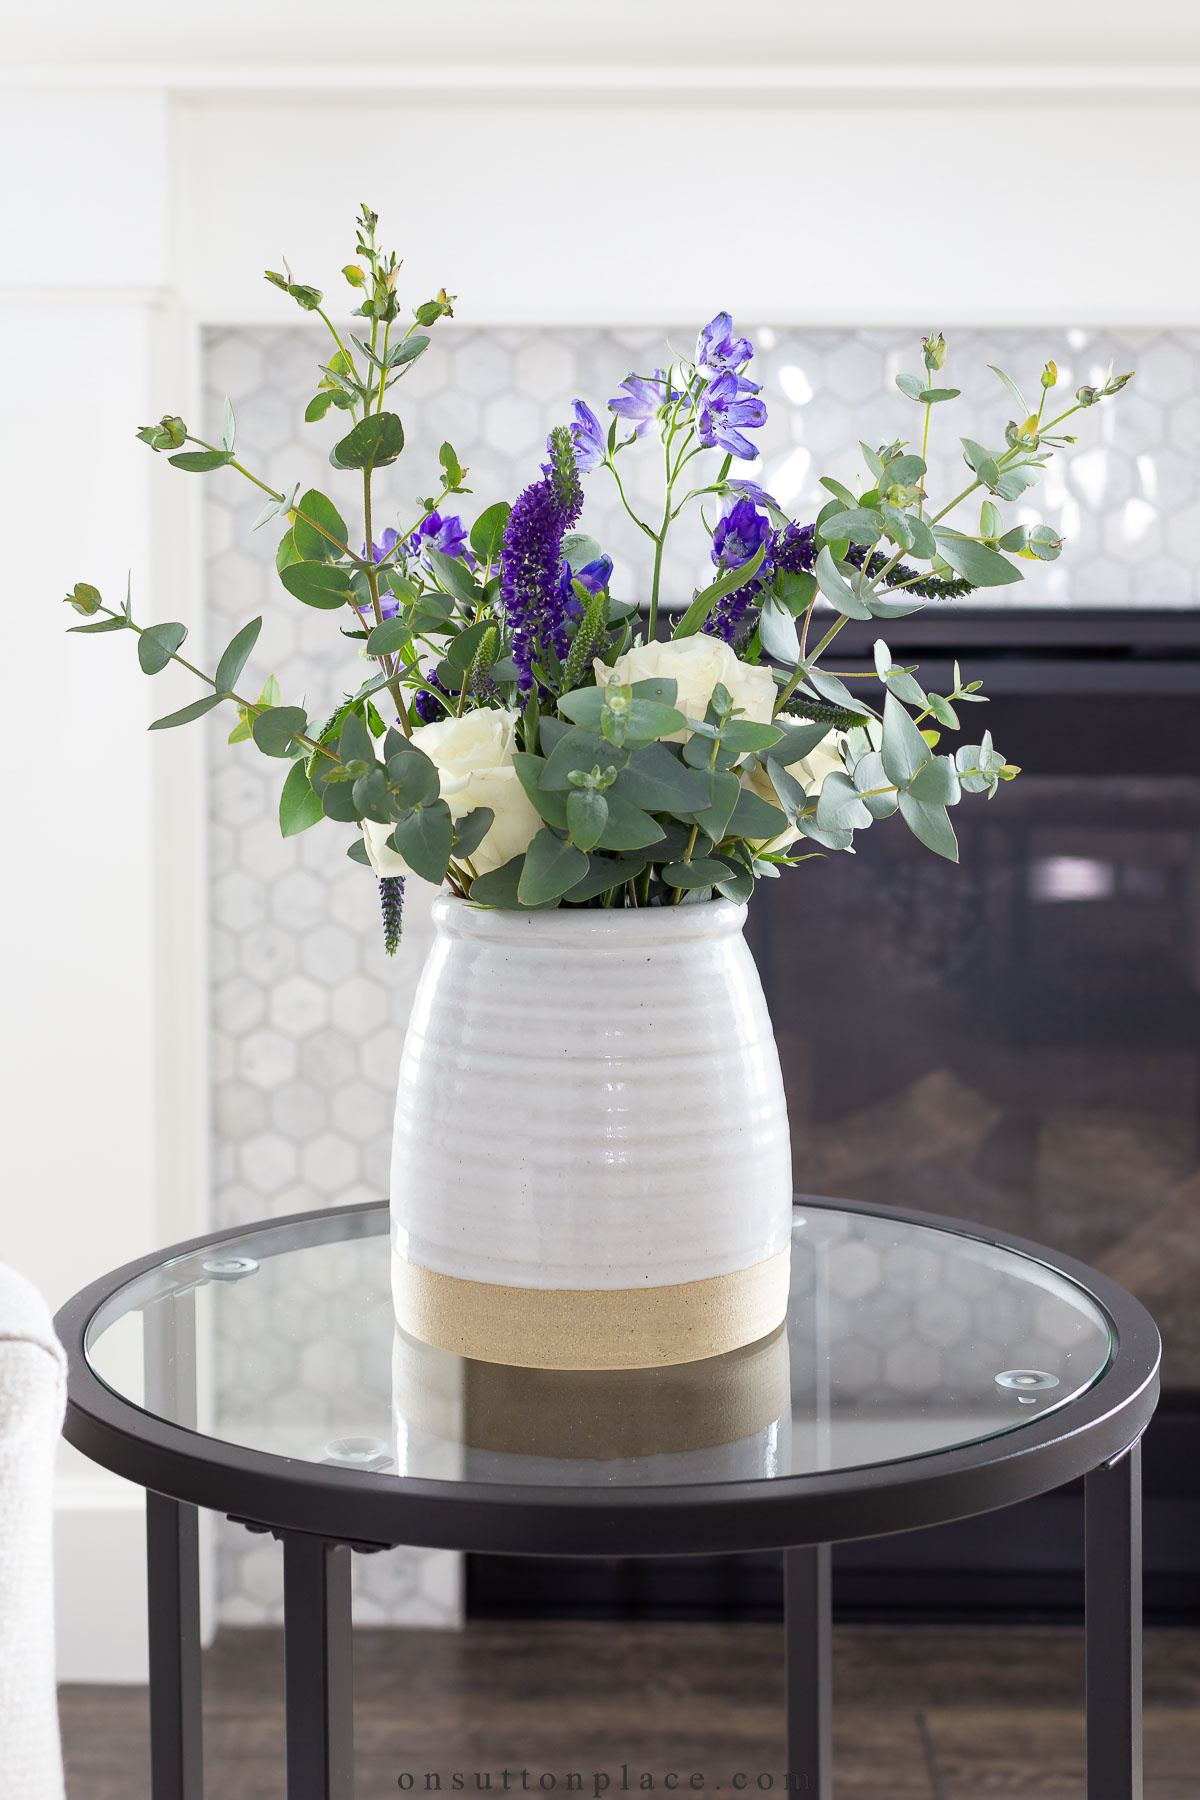 https://www.onsuttonplace.com/wp-content/uploads/2023/01/farmhouse-jug-of-fresh-flowers-on-round-table-1.jpg